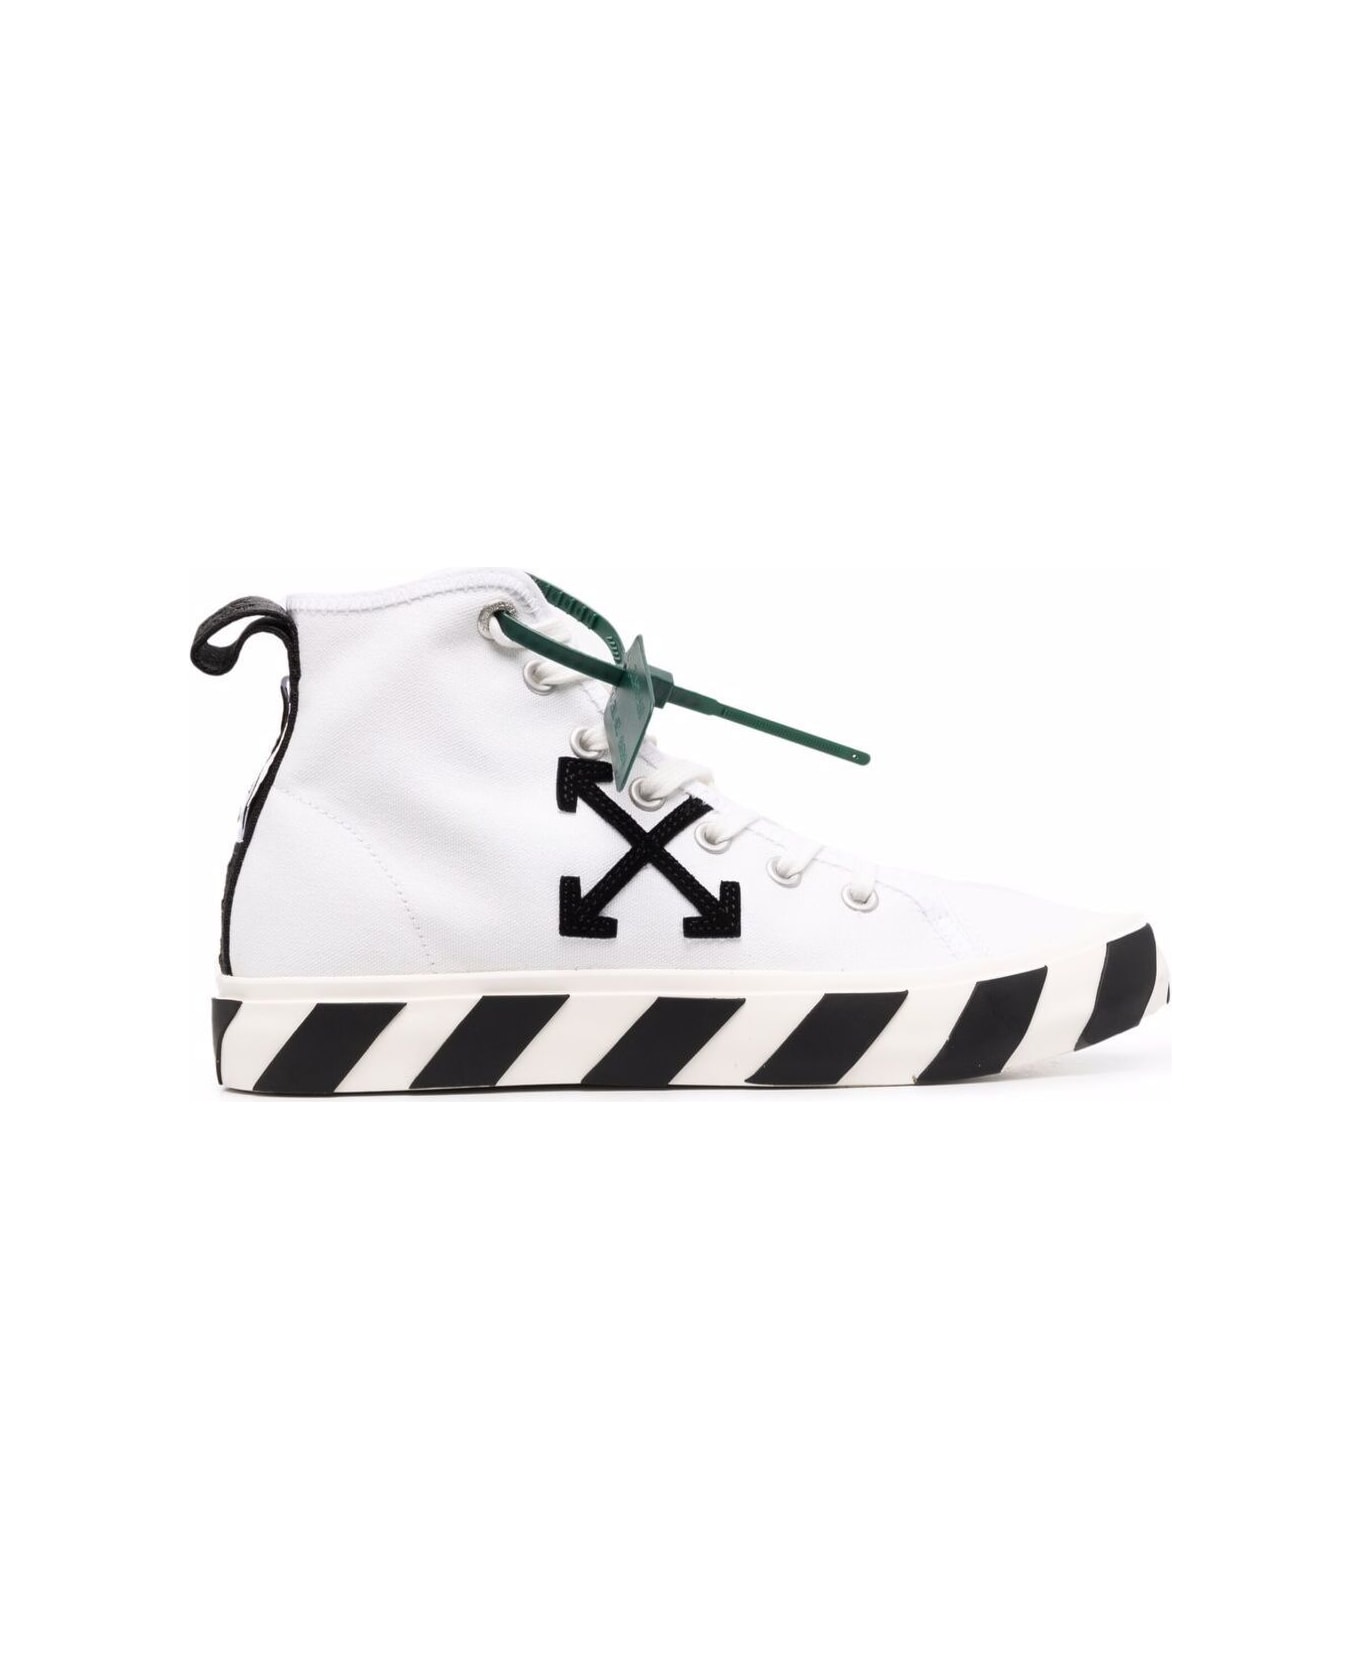 Off-White White Mid-top Sneakers With Arrow Motif And Bi-colour Sole In Canvas Man - White